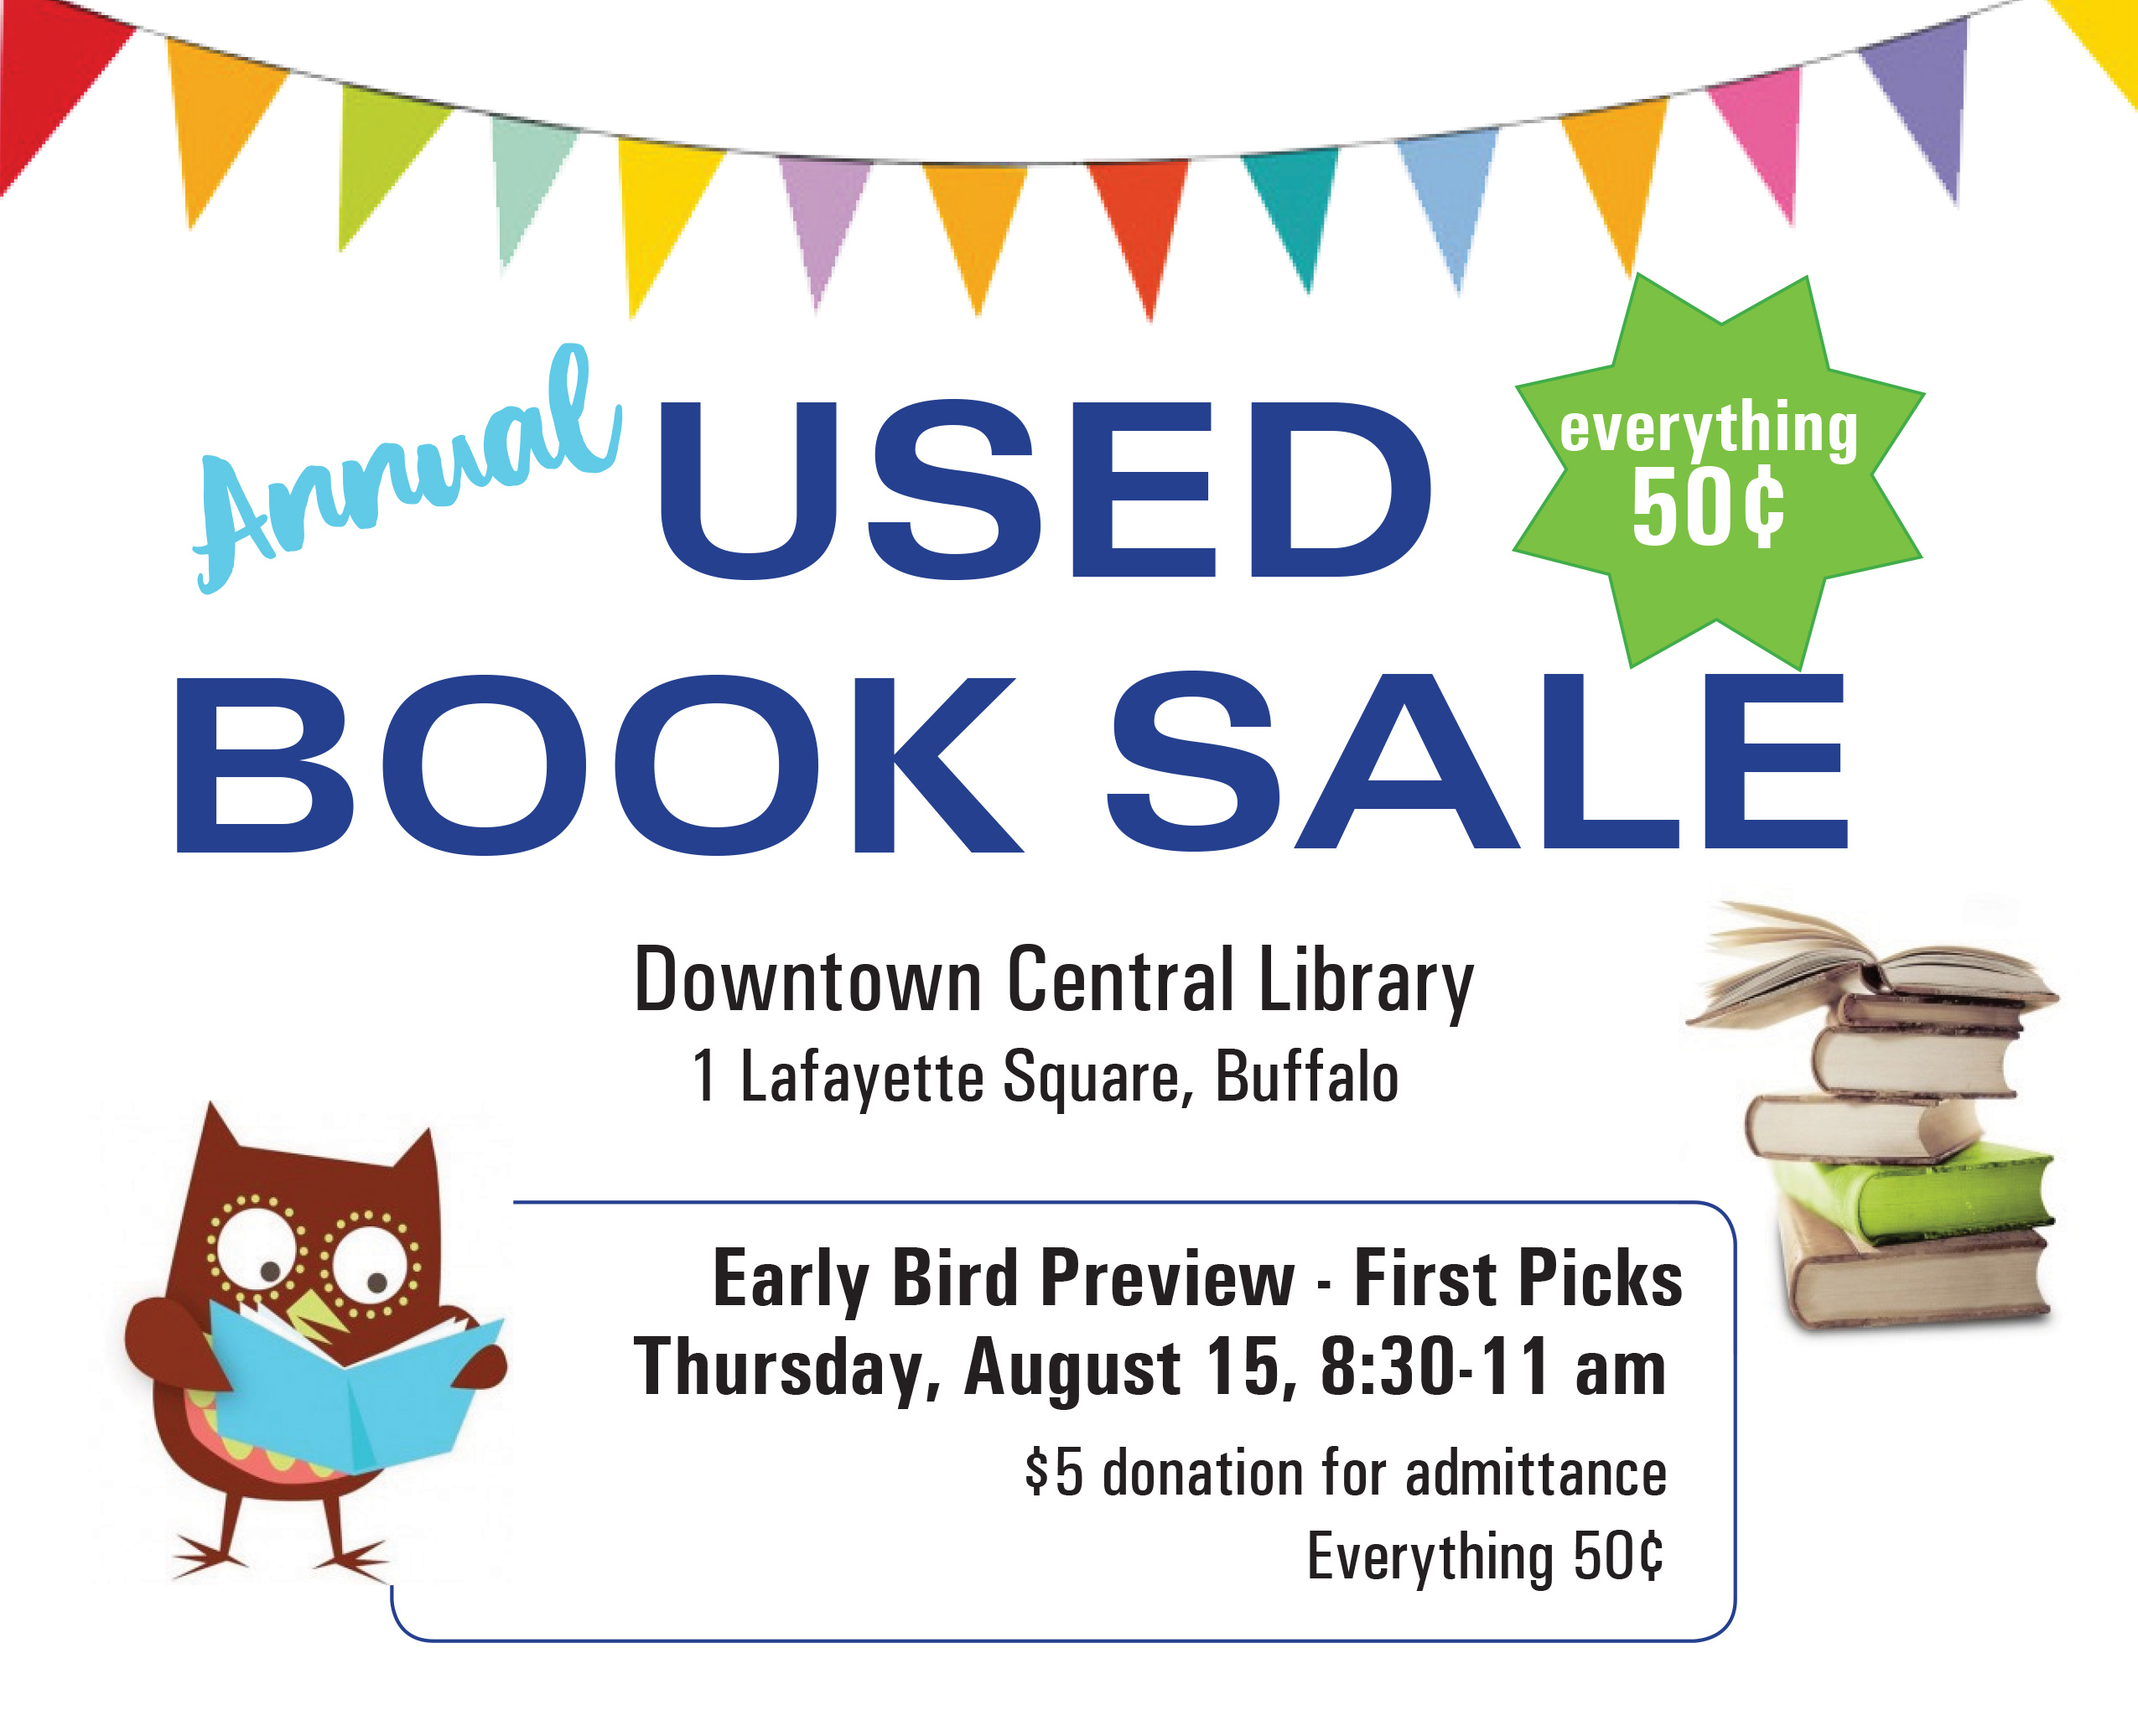 Downtown Central Library Annual Used Book Sale - Buffalo Place